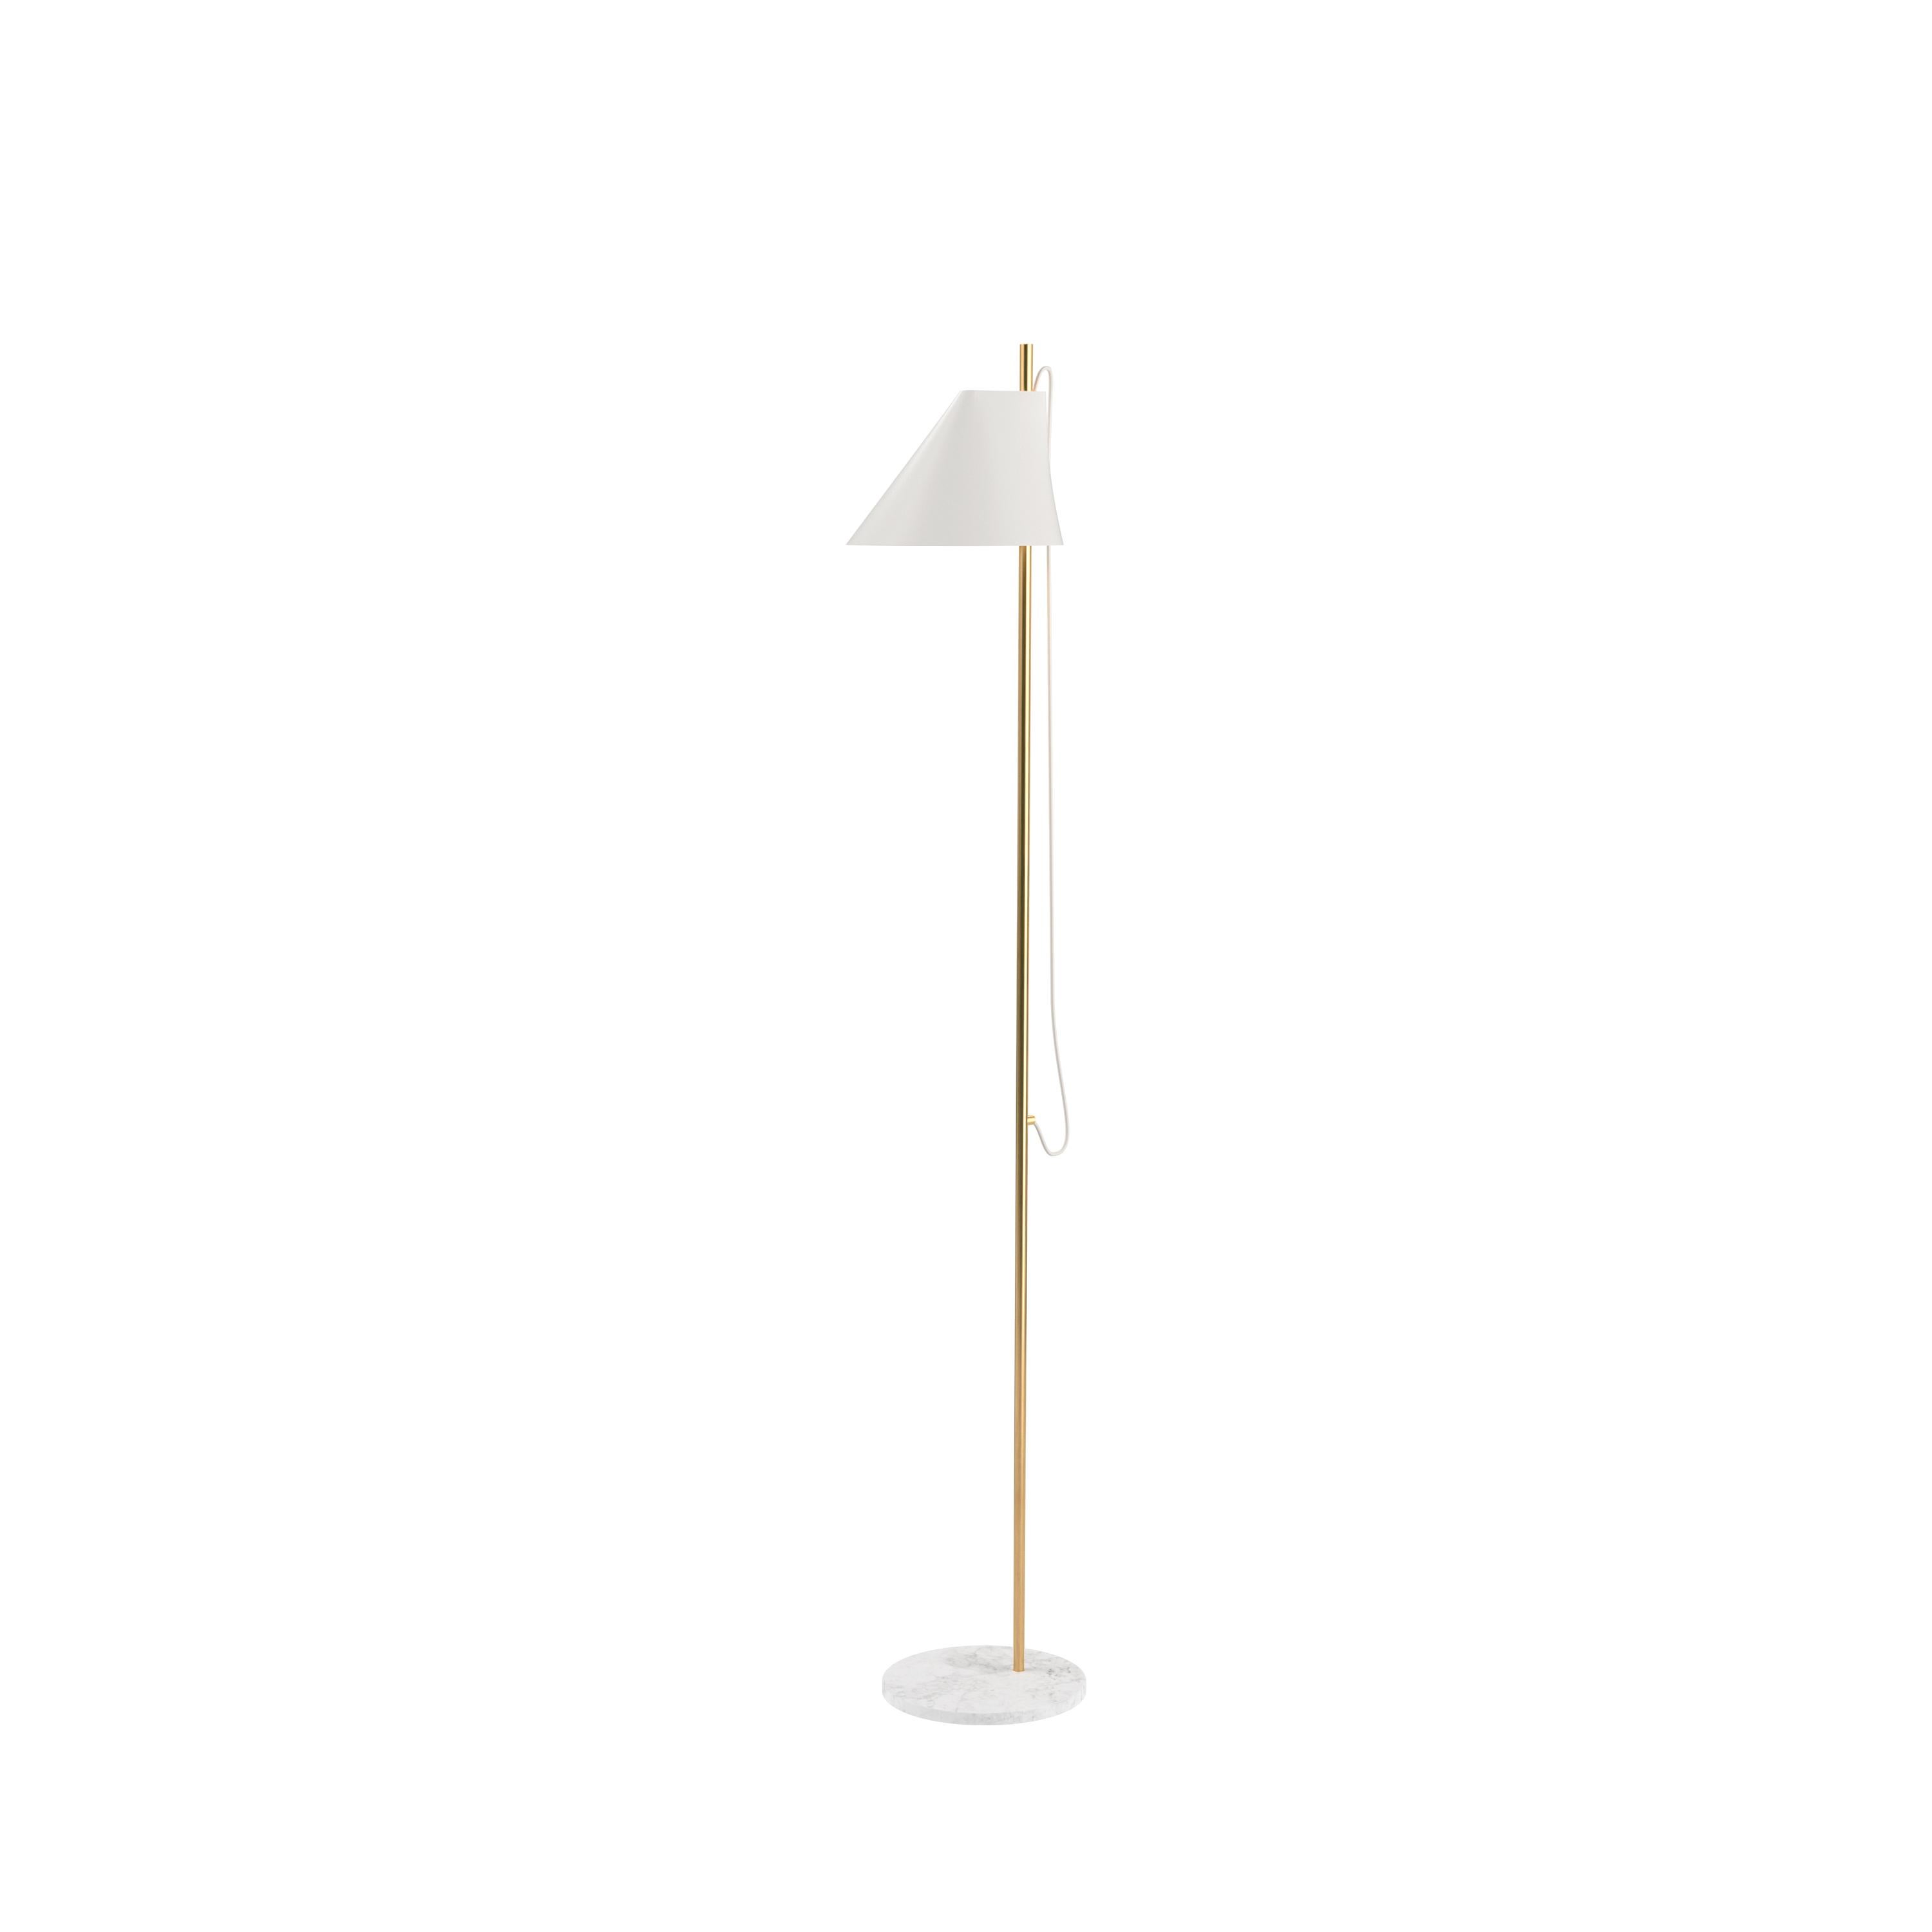 GamFratesi black 'YUH' brass and marble floor lamp for Louis Poulsen. Designed by Stine Gam and Enrico Fratesi, the YUH reflects Louis Poulsen’s philosophy of designing to shape light. Inspired by the Classic virtues of Danish Modernism, Poul